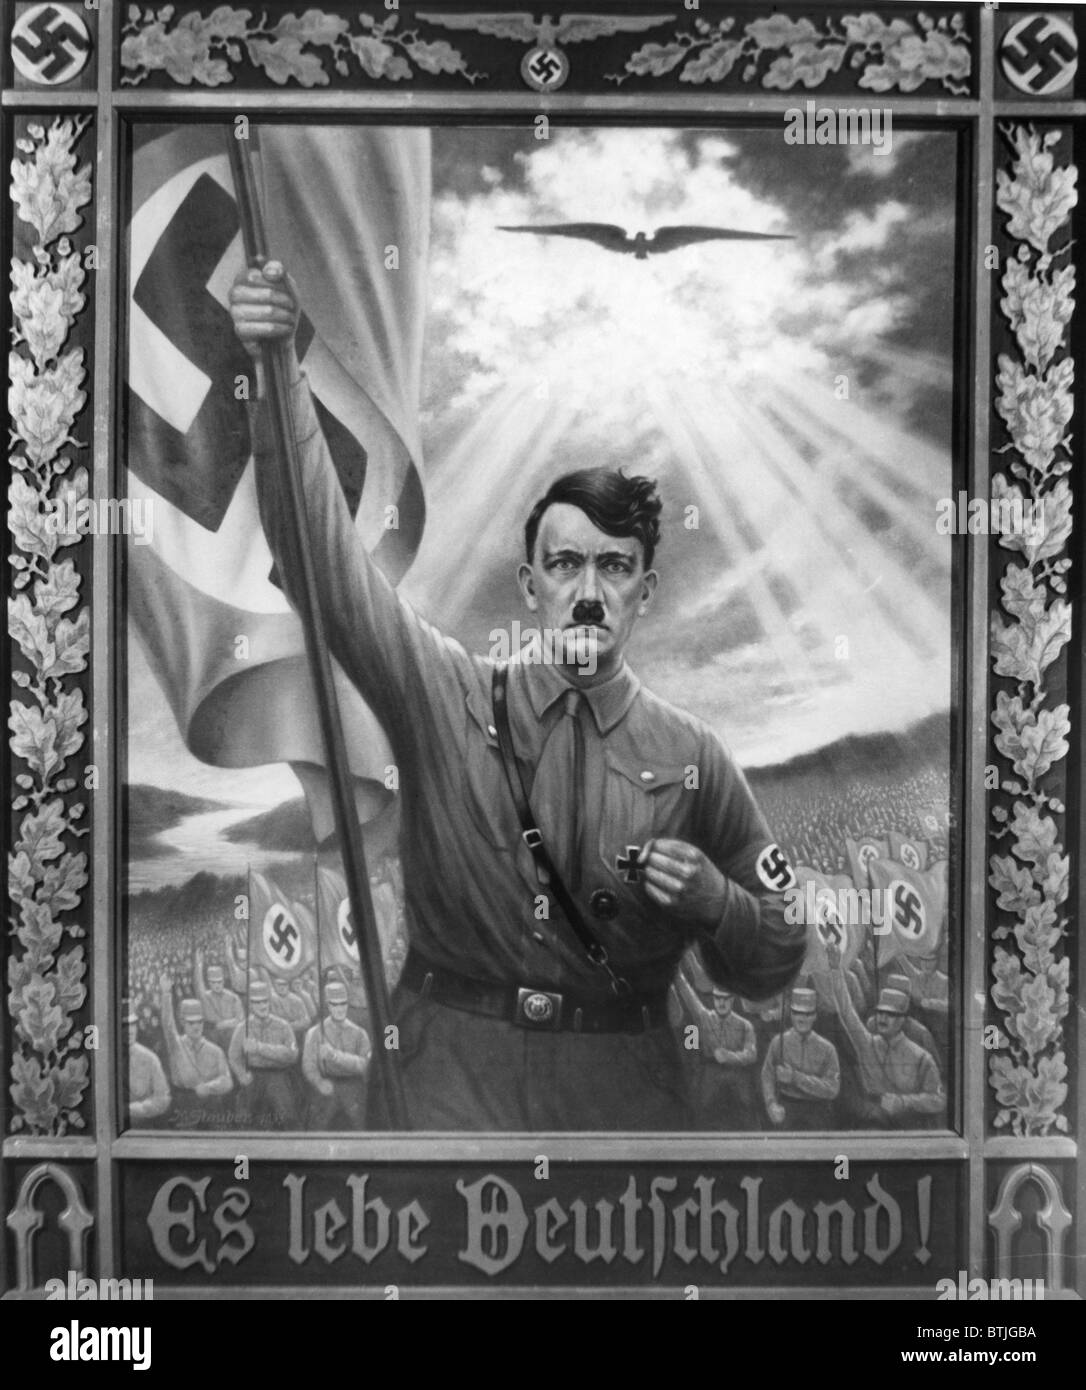 ADOLF HITLER, 1933 painting entitled, 'Es lebe Deutschland,' commemorating the year Hitler came to power.  Everett/CSU Archives. Stock Photo